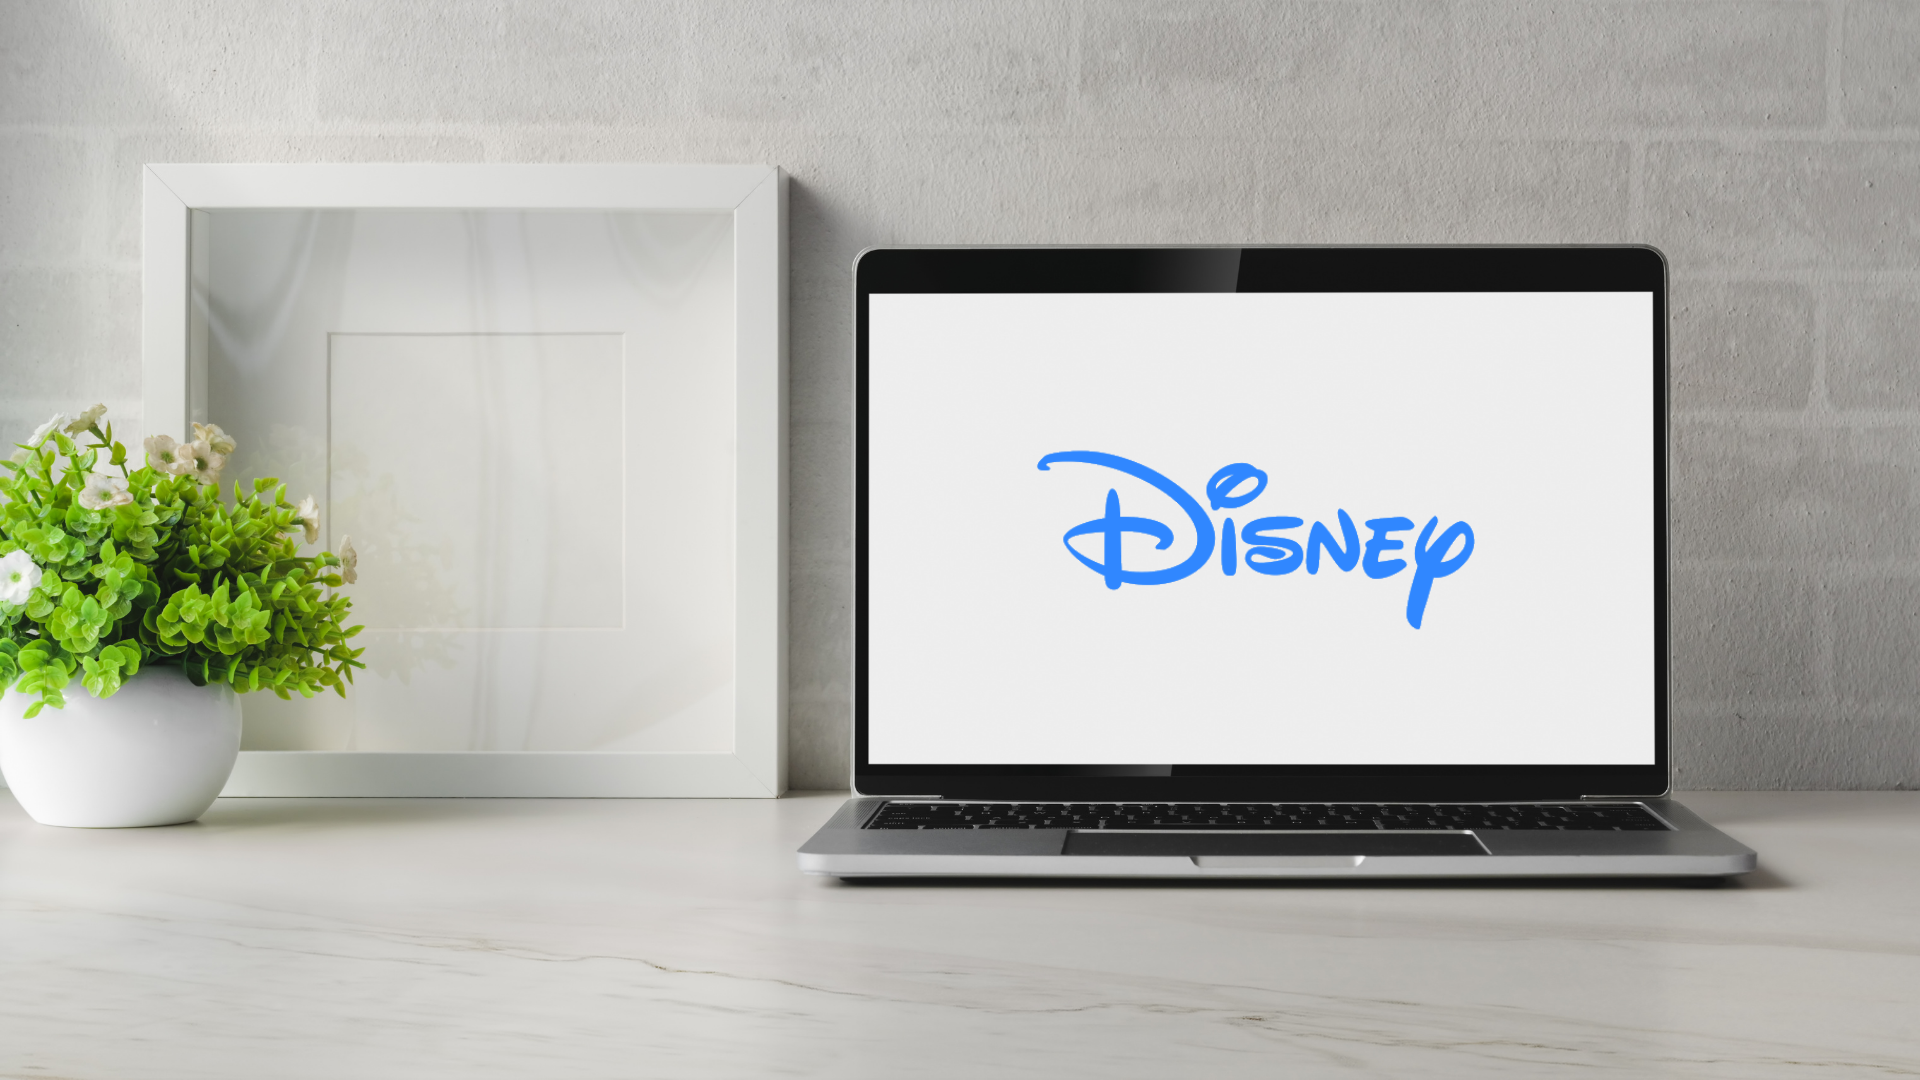 Walt Disney announces reorganization to focus on streaming, Amazon, Google, and Roku All Have New Streaming Devices And Other Top News